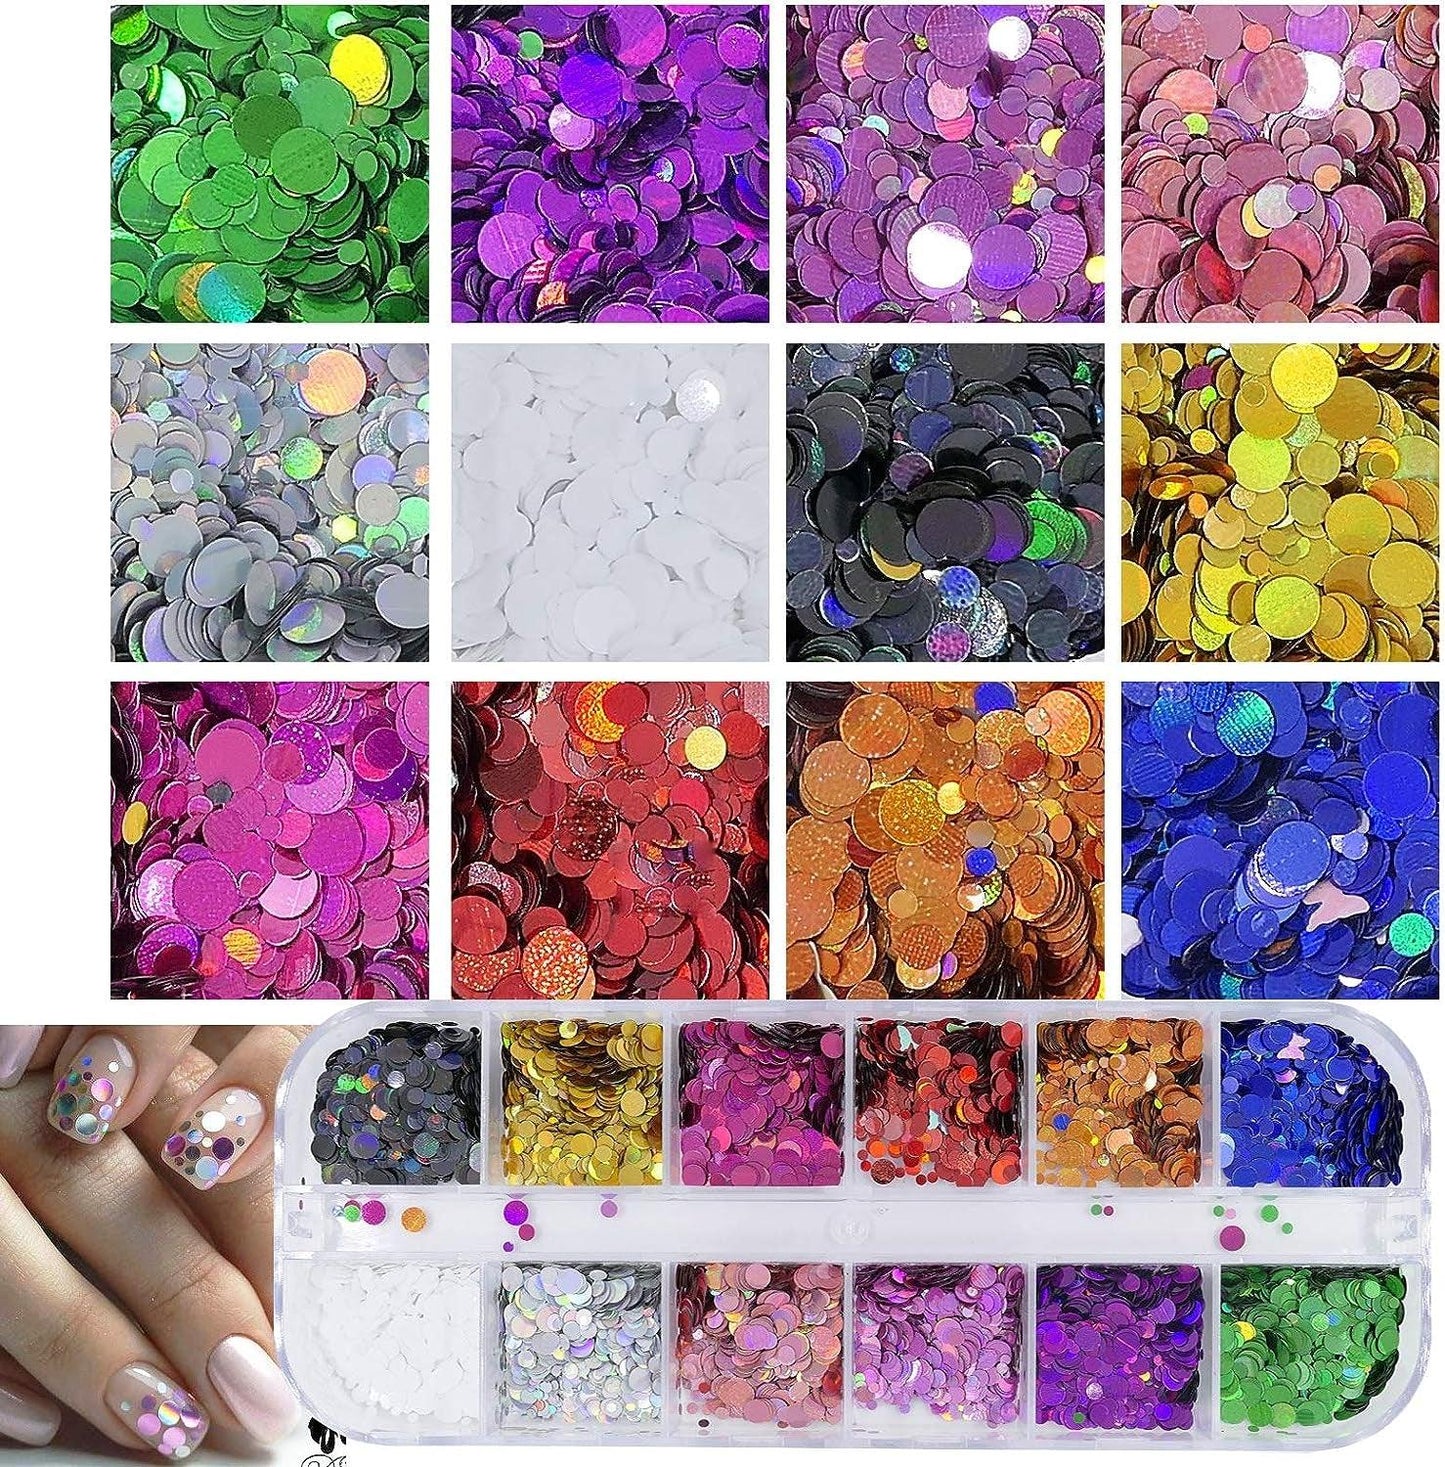 4 Boxes Holographic Nail Sequins Shapes Mixed Iridescent Nail Glitter Flakes Butterfly Hearts Star DIY Design Manicure Decorations Sets for Nail Art/Craft/Makeup - WoodArtSupply